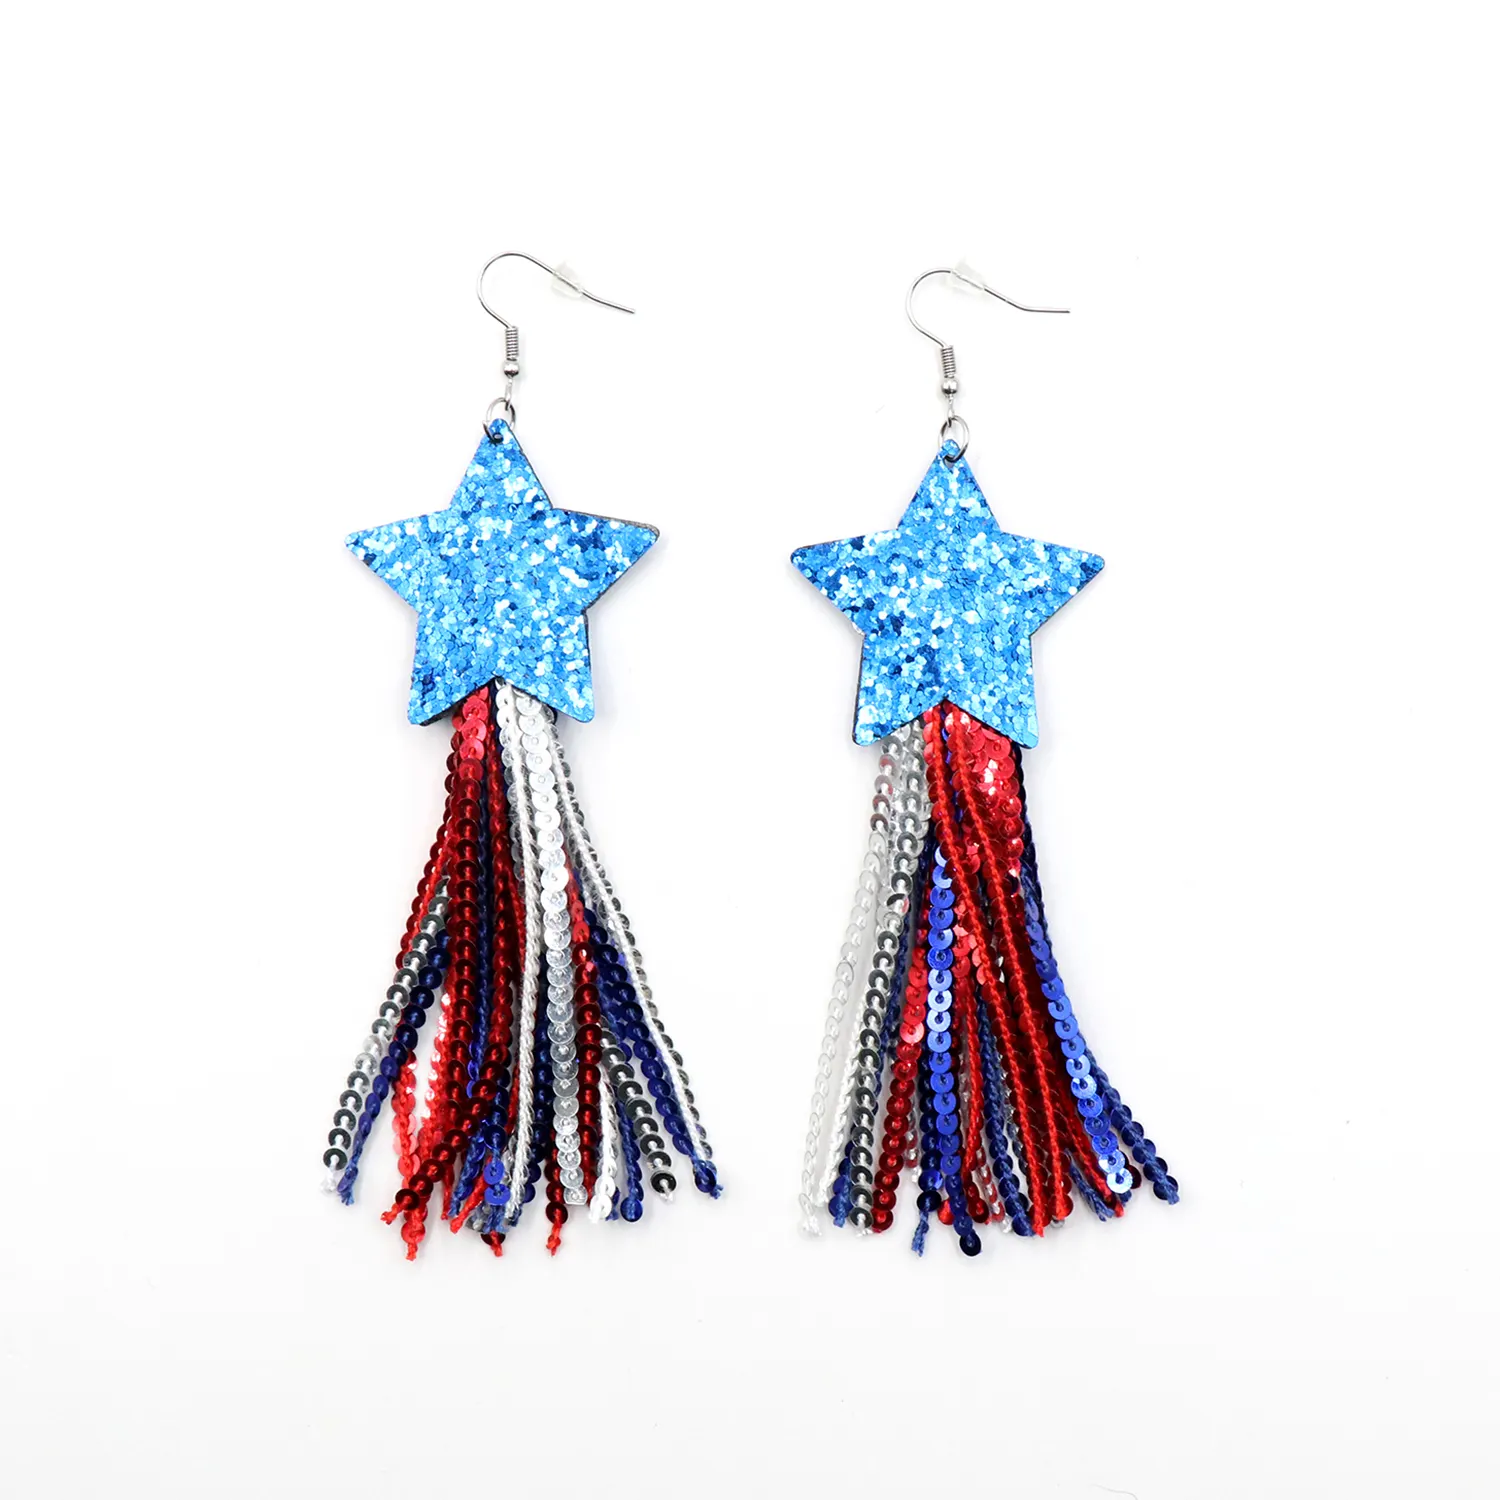 MD150ER2335 New Cross-Border Handmade Women's Earrings Colorful Tassel Sequins Five-Pointed Star Independence Day